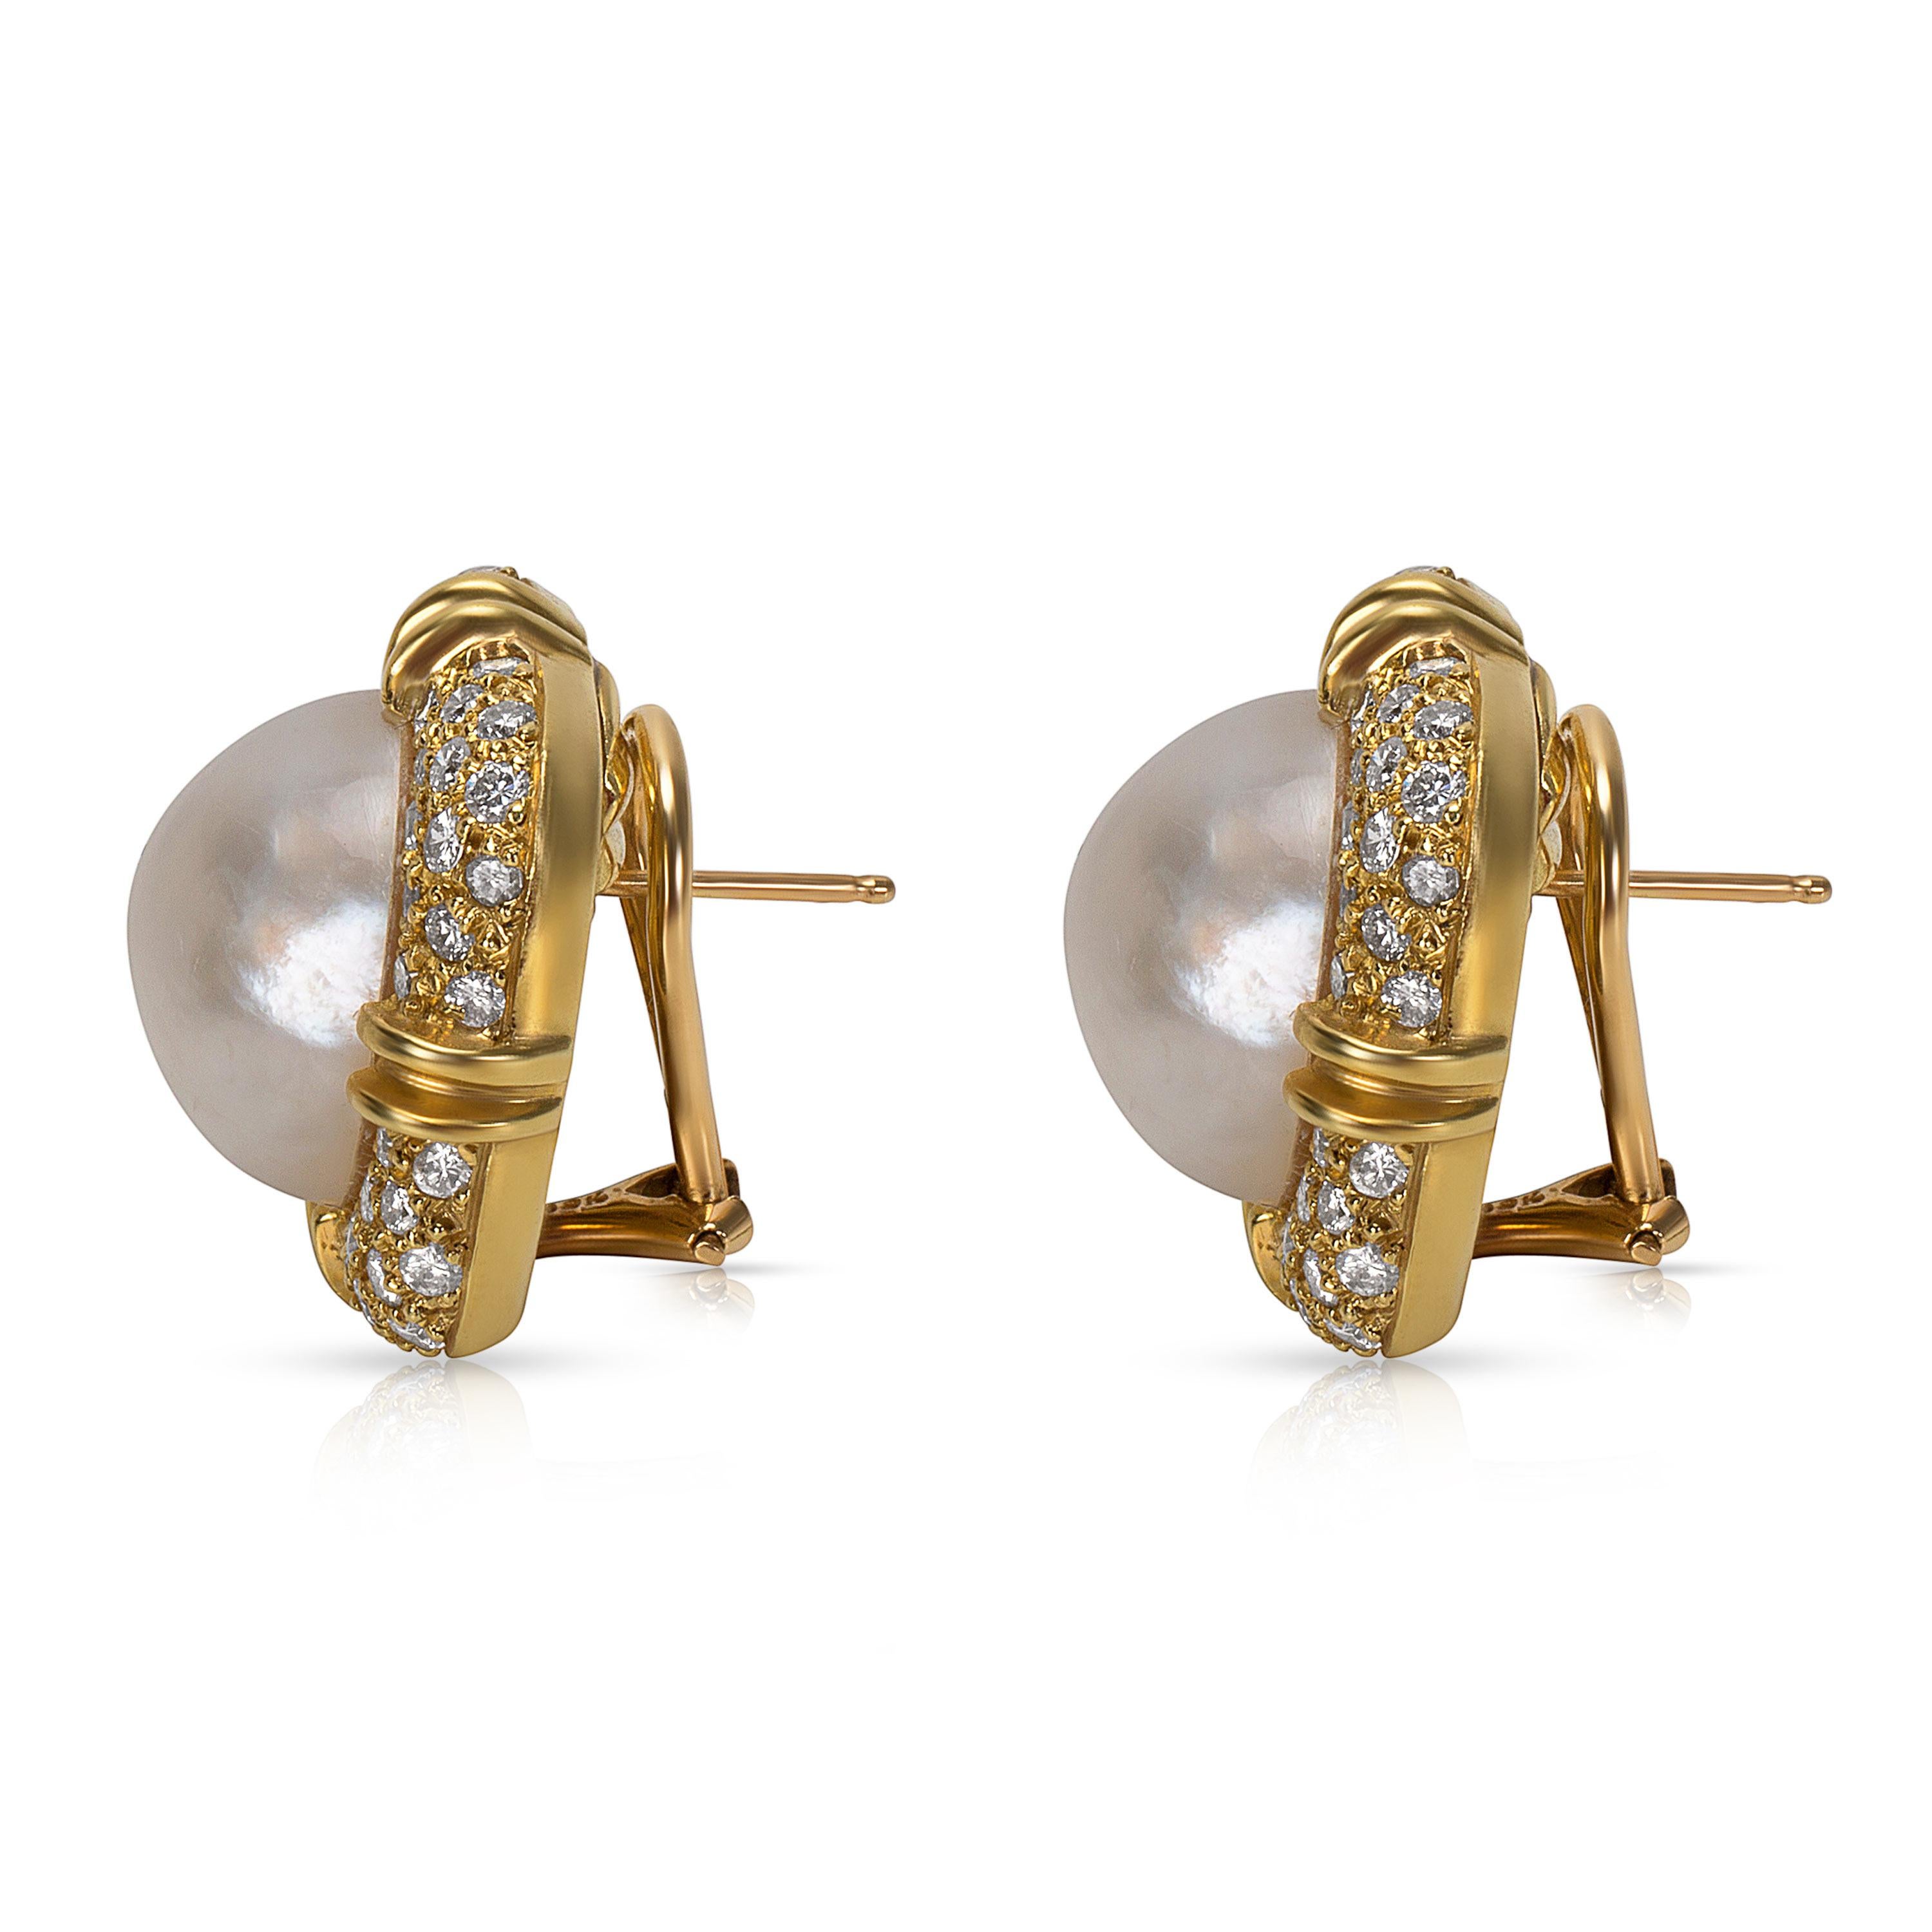 Round Cut Makur Diamond and Mabe Pearl Earrings in 18 Karat Gold 2.00 Carat